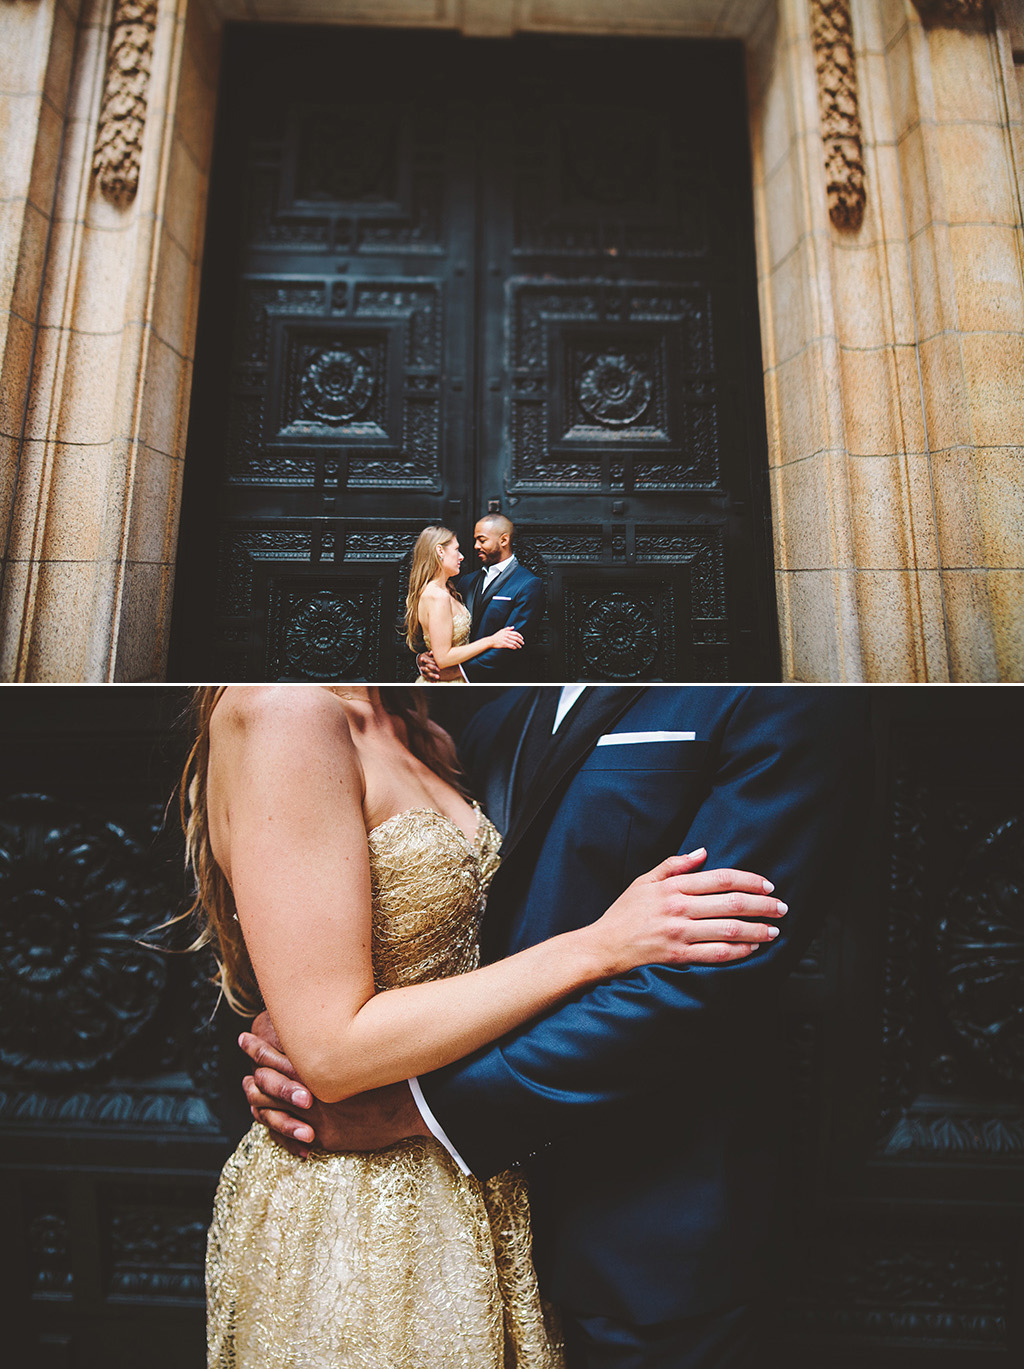 A city wedding in Chicago